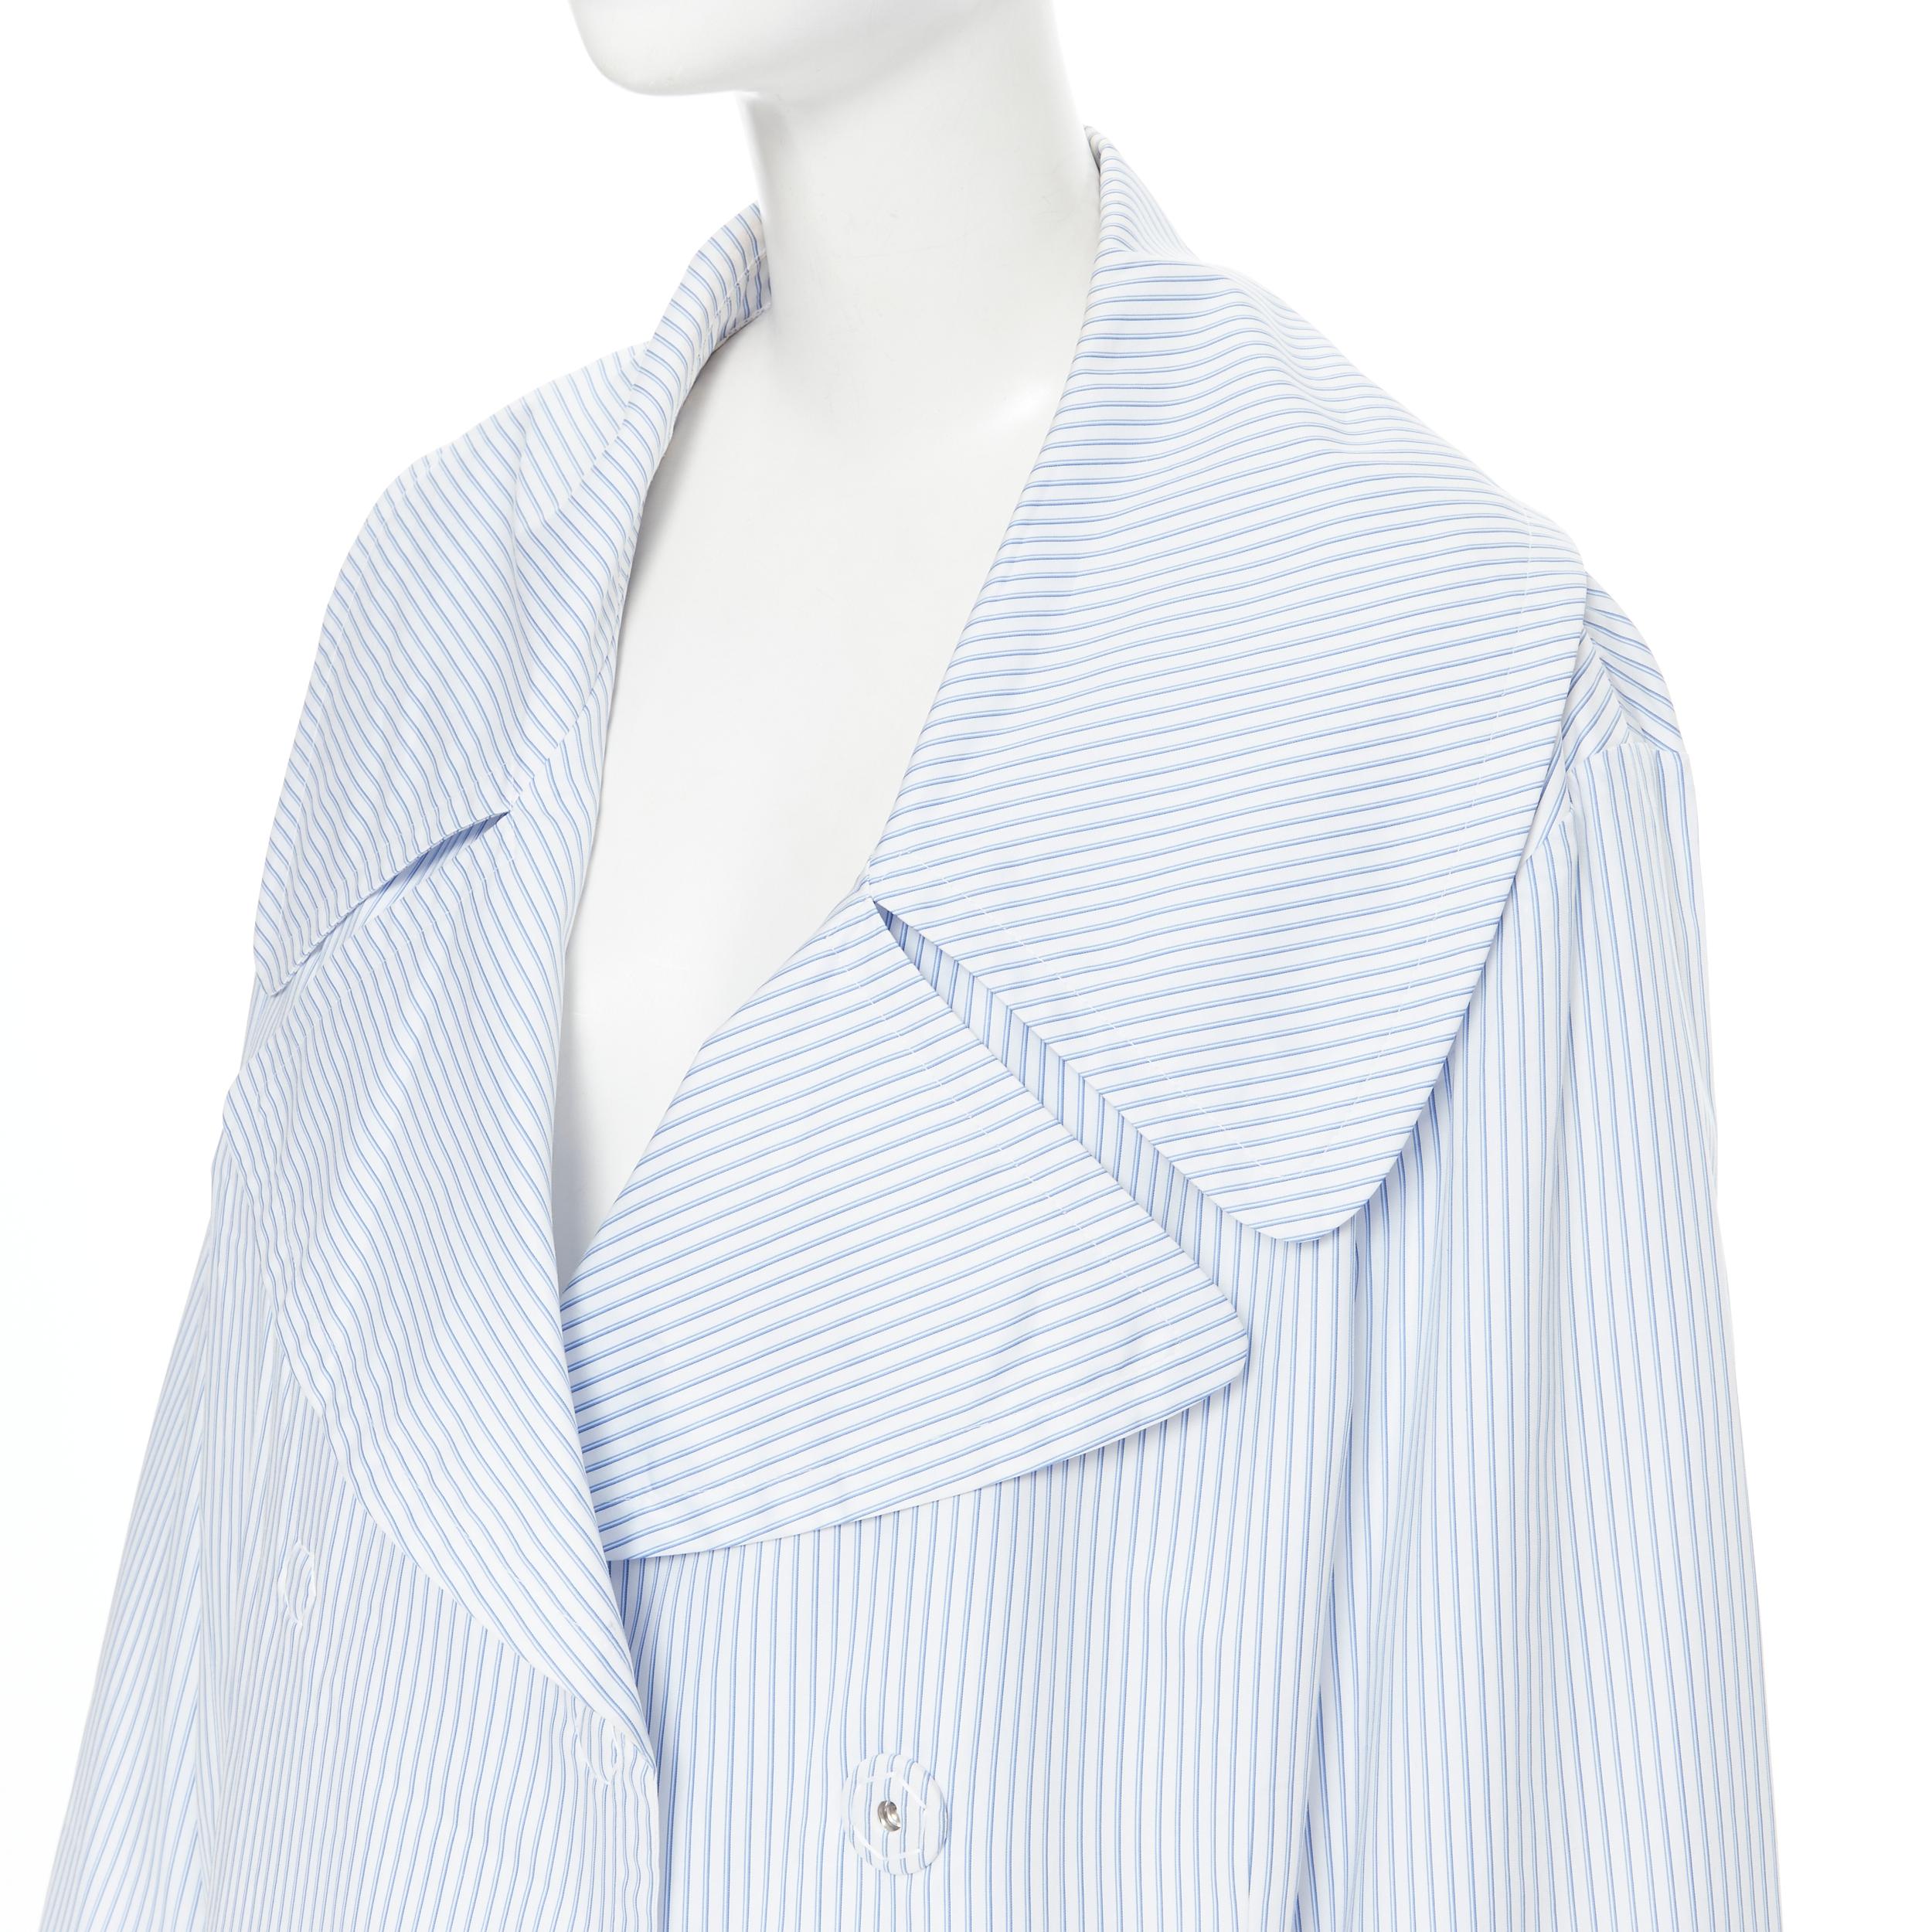 MAISON MARGIELA 2017 blue white pinstripe oversized double breasted coat IT40 S Reference: AEMA/A00031 Brand: Maison Margiela Collection: 2017 Material: Cotton Color: Blue Pattern: Striped Closure: Snap Extra Detail: Oversized spread collar.